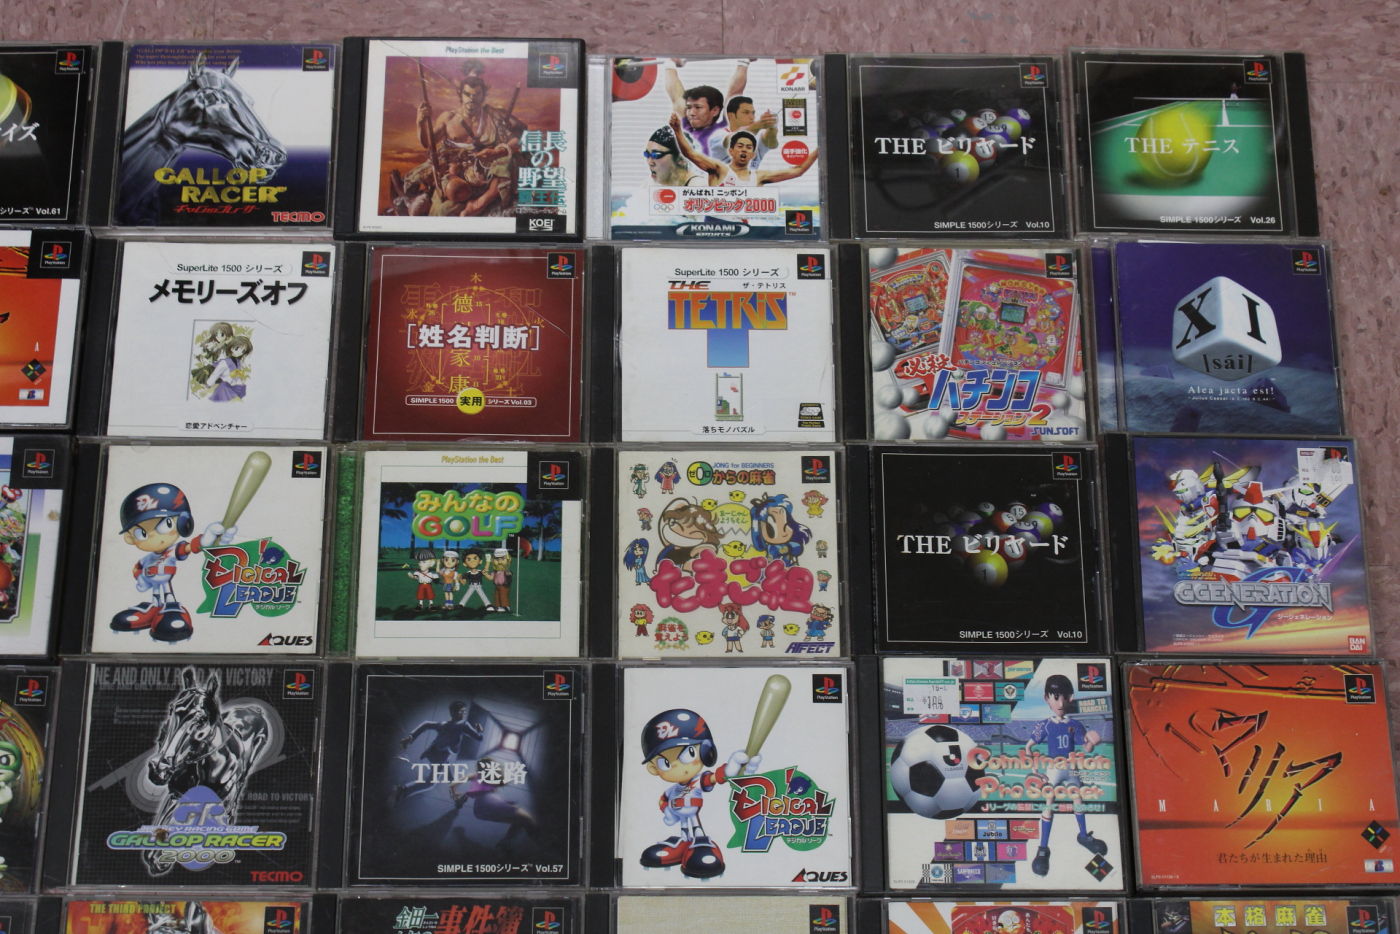 Wholesale Lot of 45 PS1 PlayStation 1 Games (Untested)